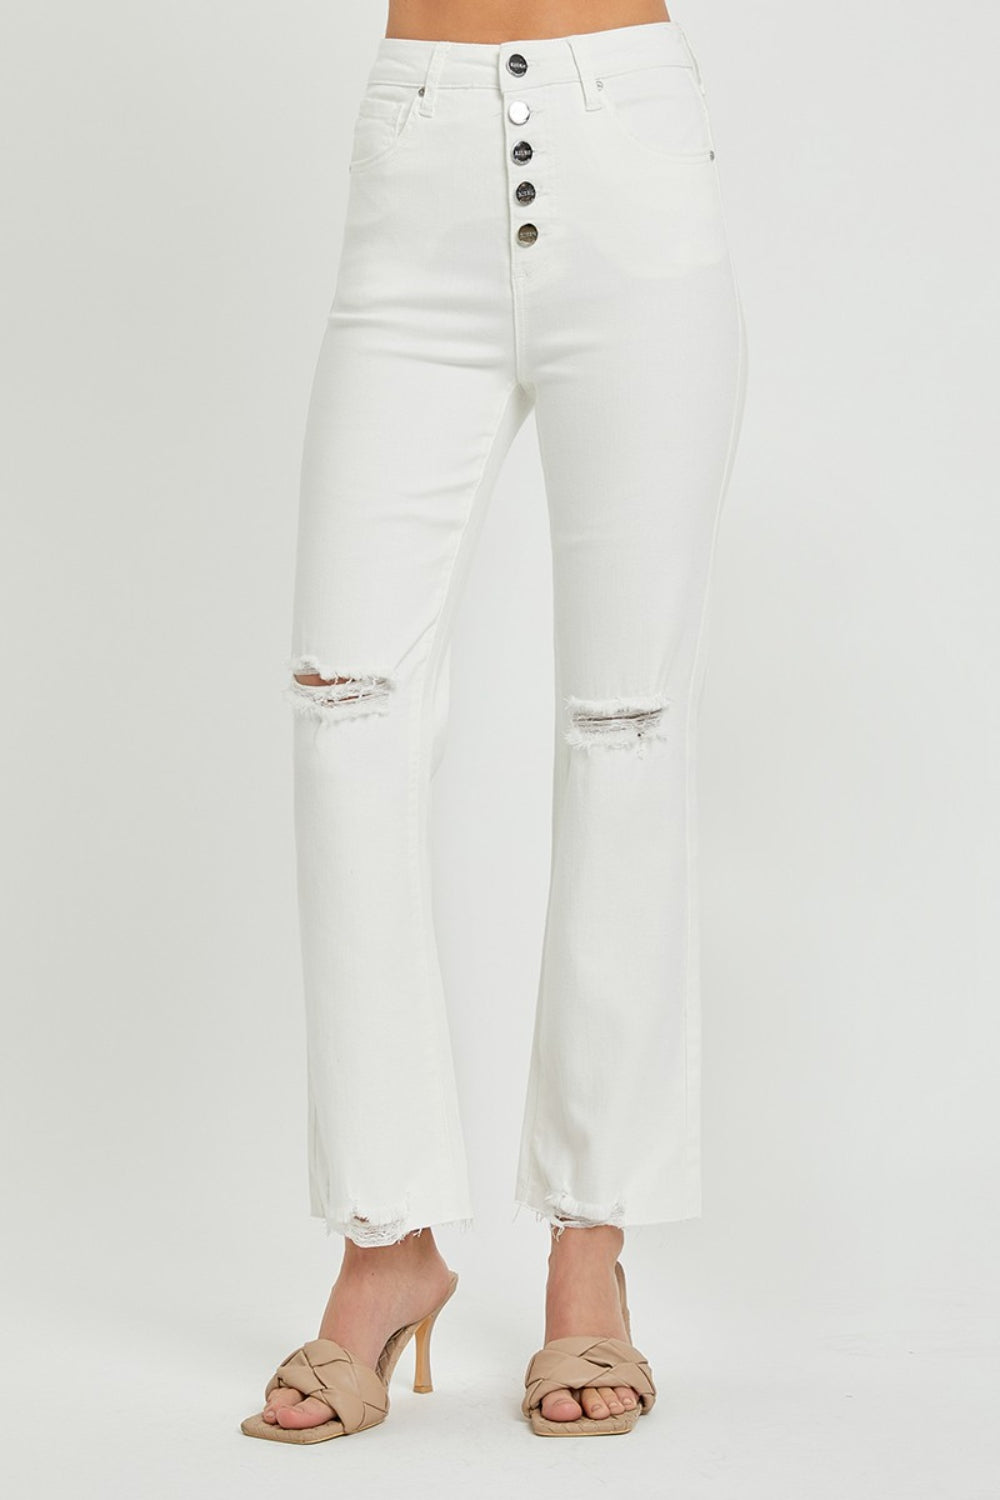 These high rise button fly straight ankle jeans are a stylish and on-trend choice for your everyday wardrobe. The high rise design creates a flattering and elongated silhouette. The button fly adds a touch of vintage charm and detail to the jeans. The straight leg cut offers a classic and versatile look that can be dressed up or down.  0-3X